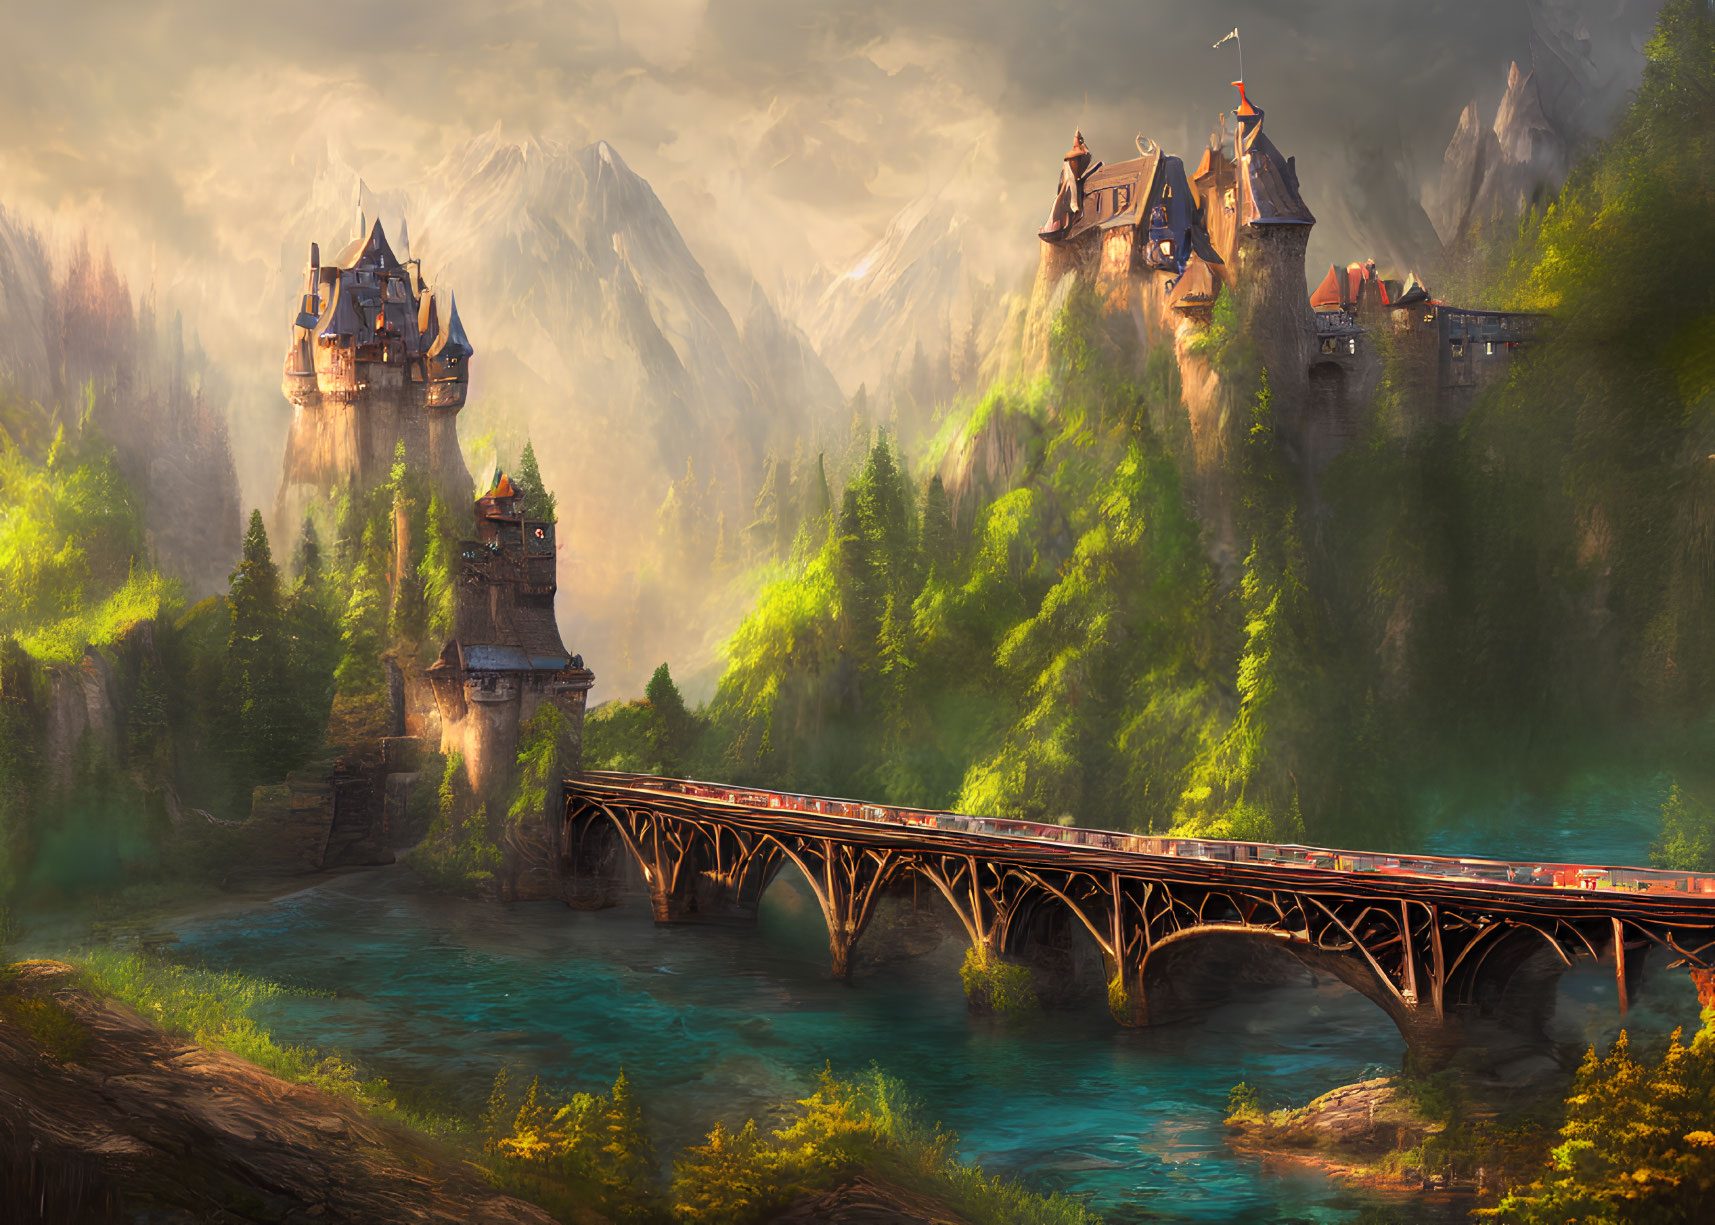 Majestic castle in fantastical landscape with river and mountains